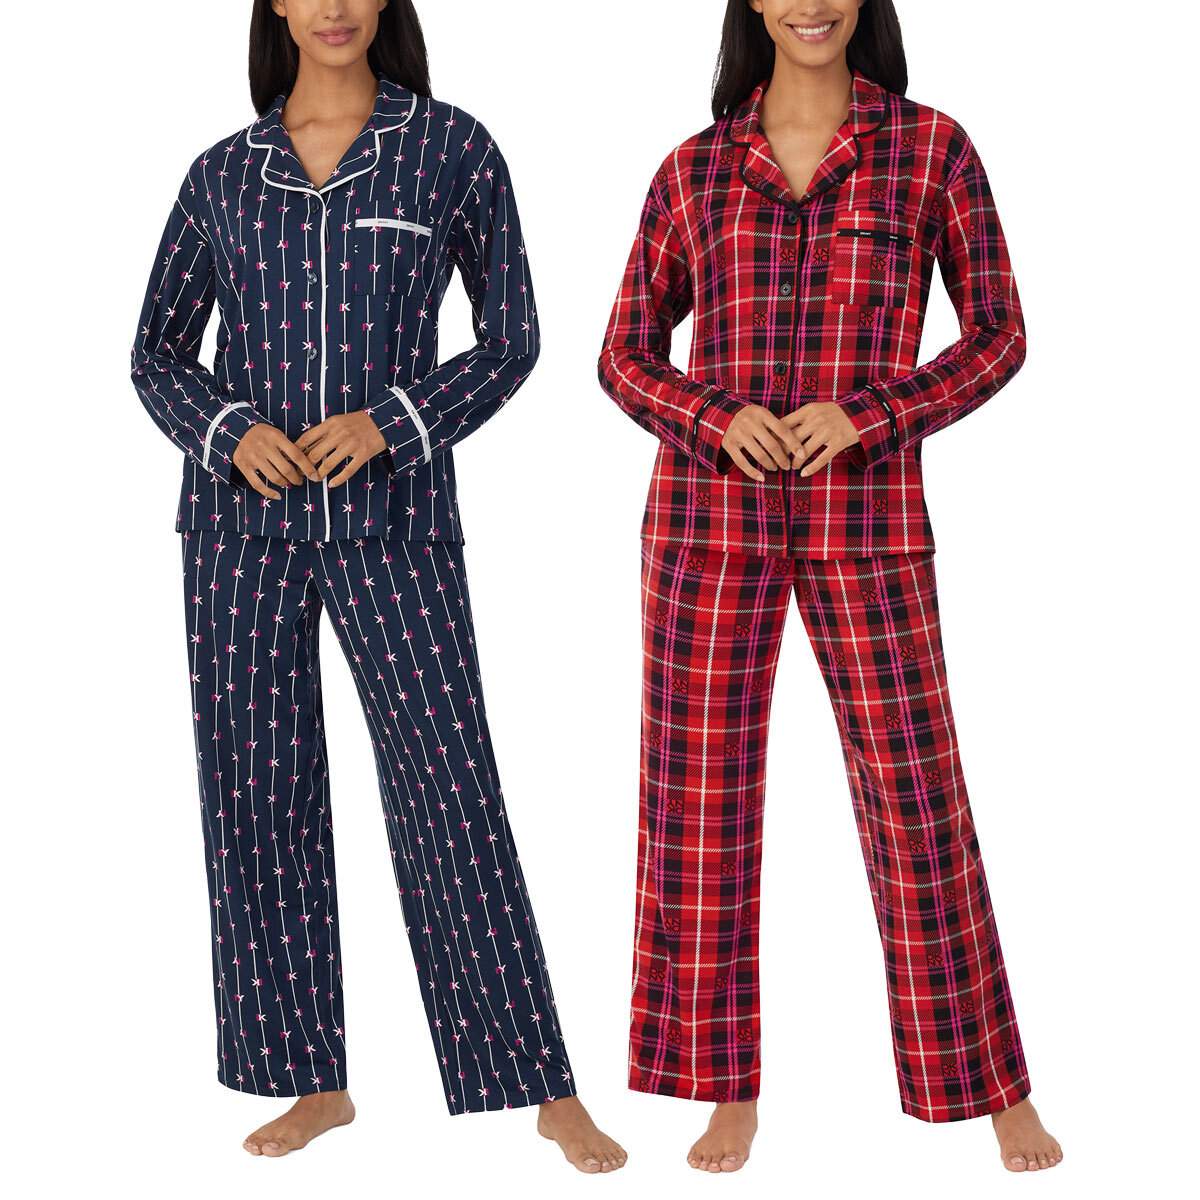 DKNY Notch Collar Pyjama Set in 4 Colours and 4 Sizes